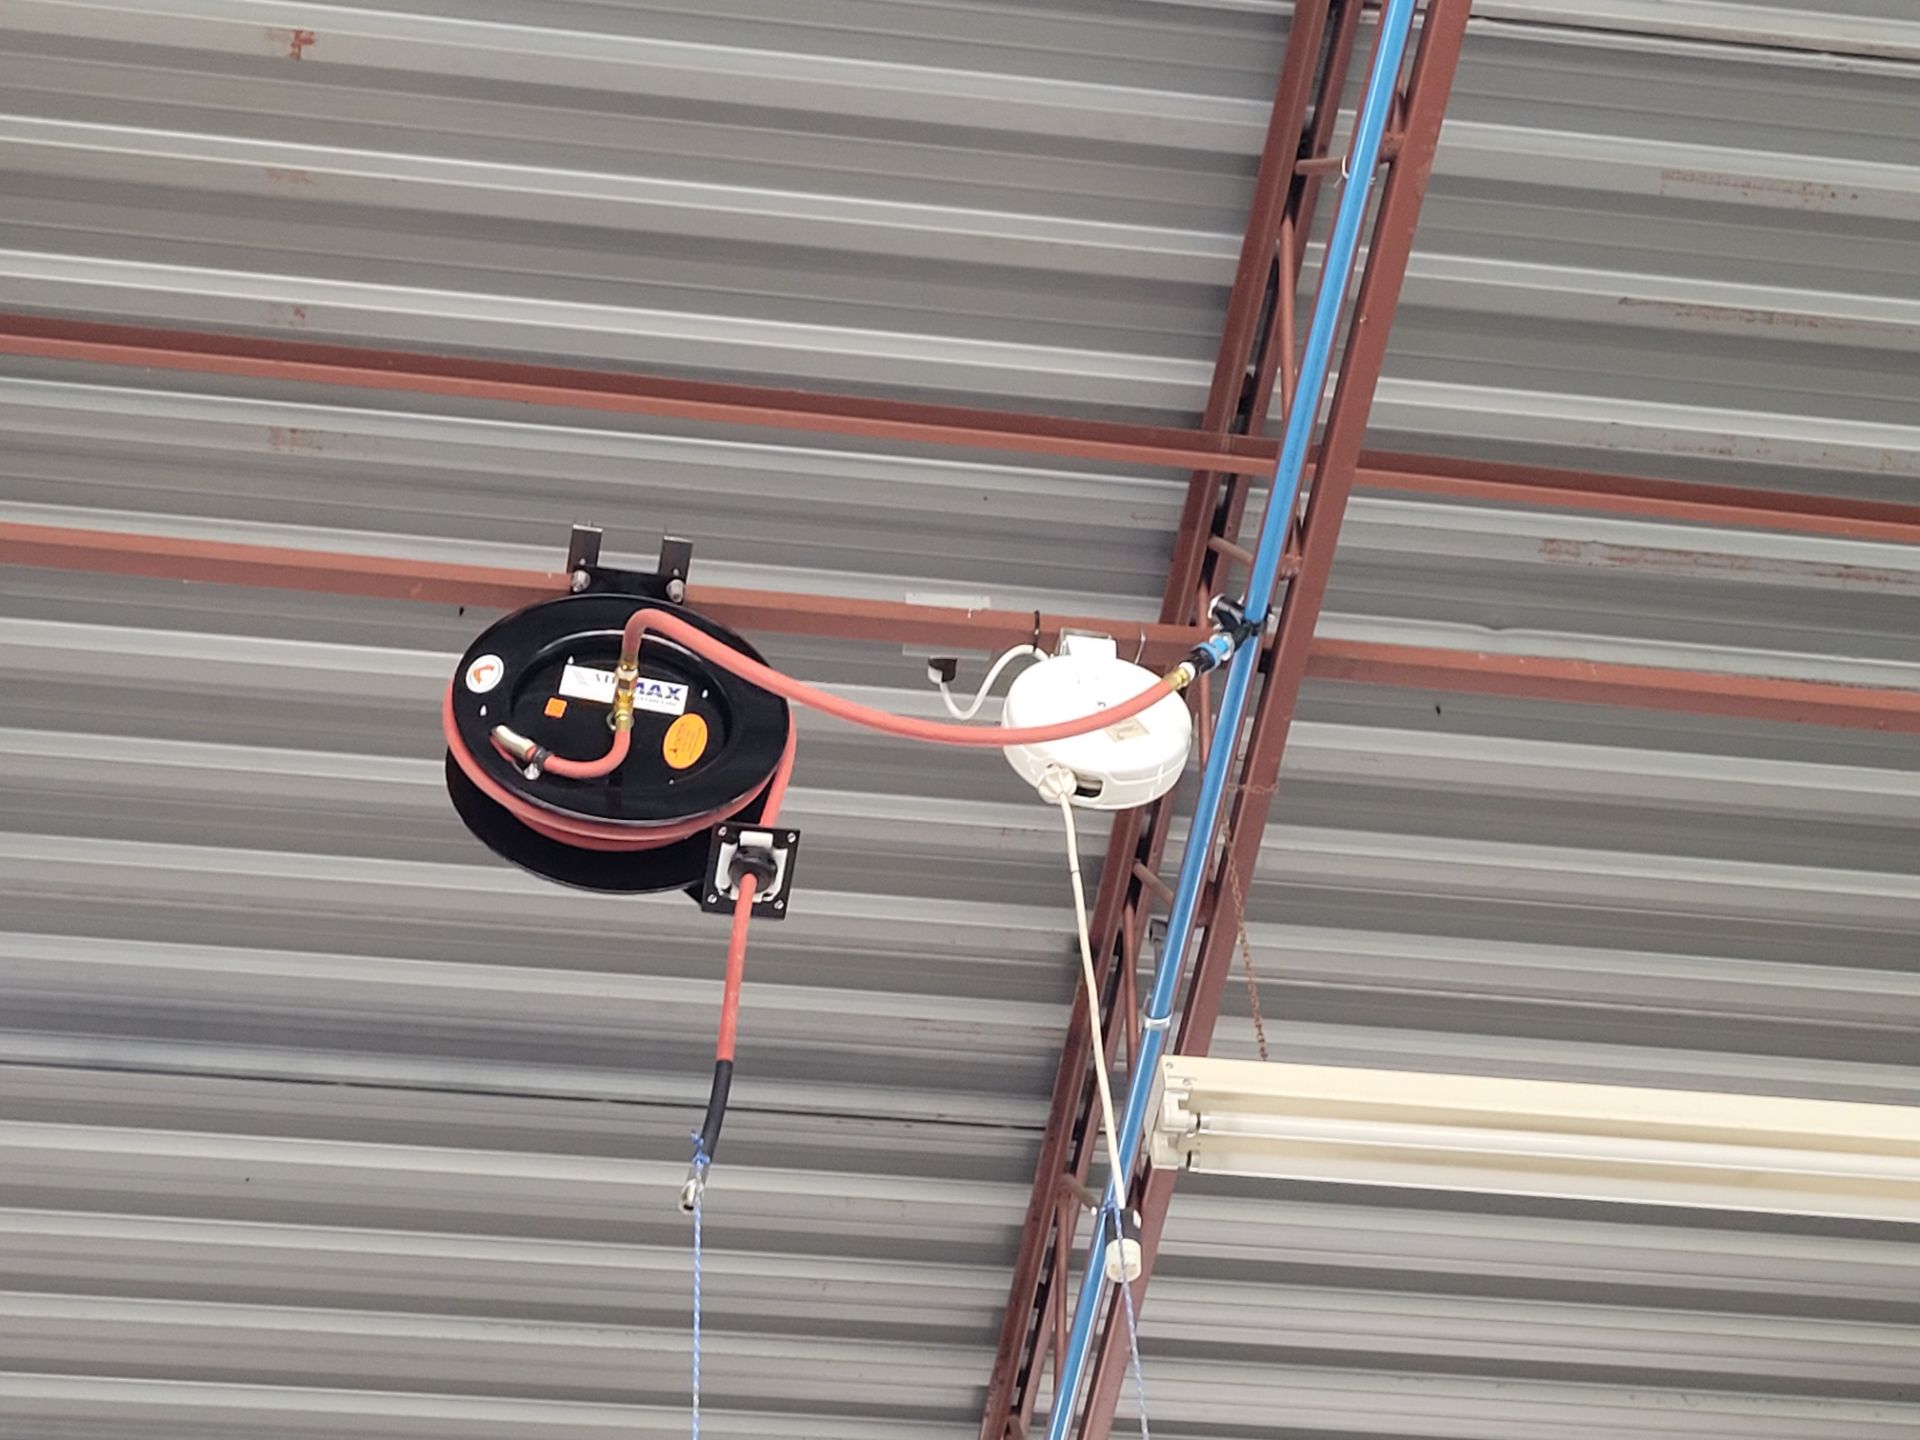 Lot of (1) Air hose and (1) electrical cord reel, mounted on ceiling - Image 2 of 2